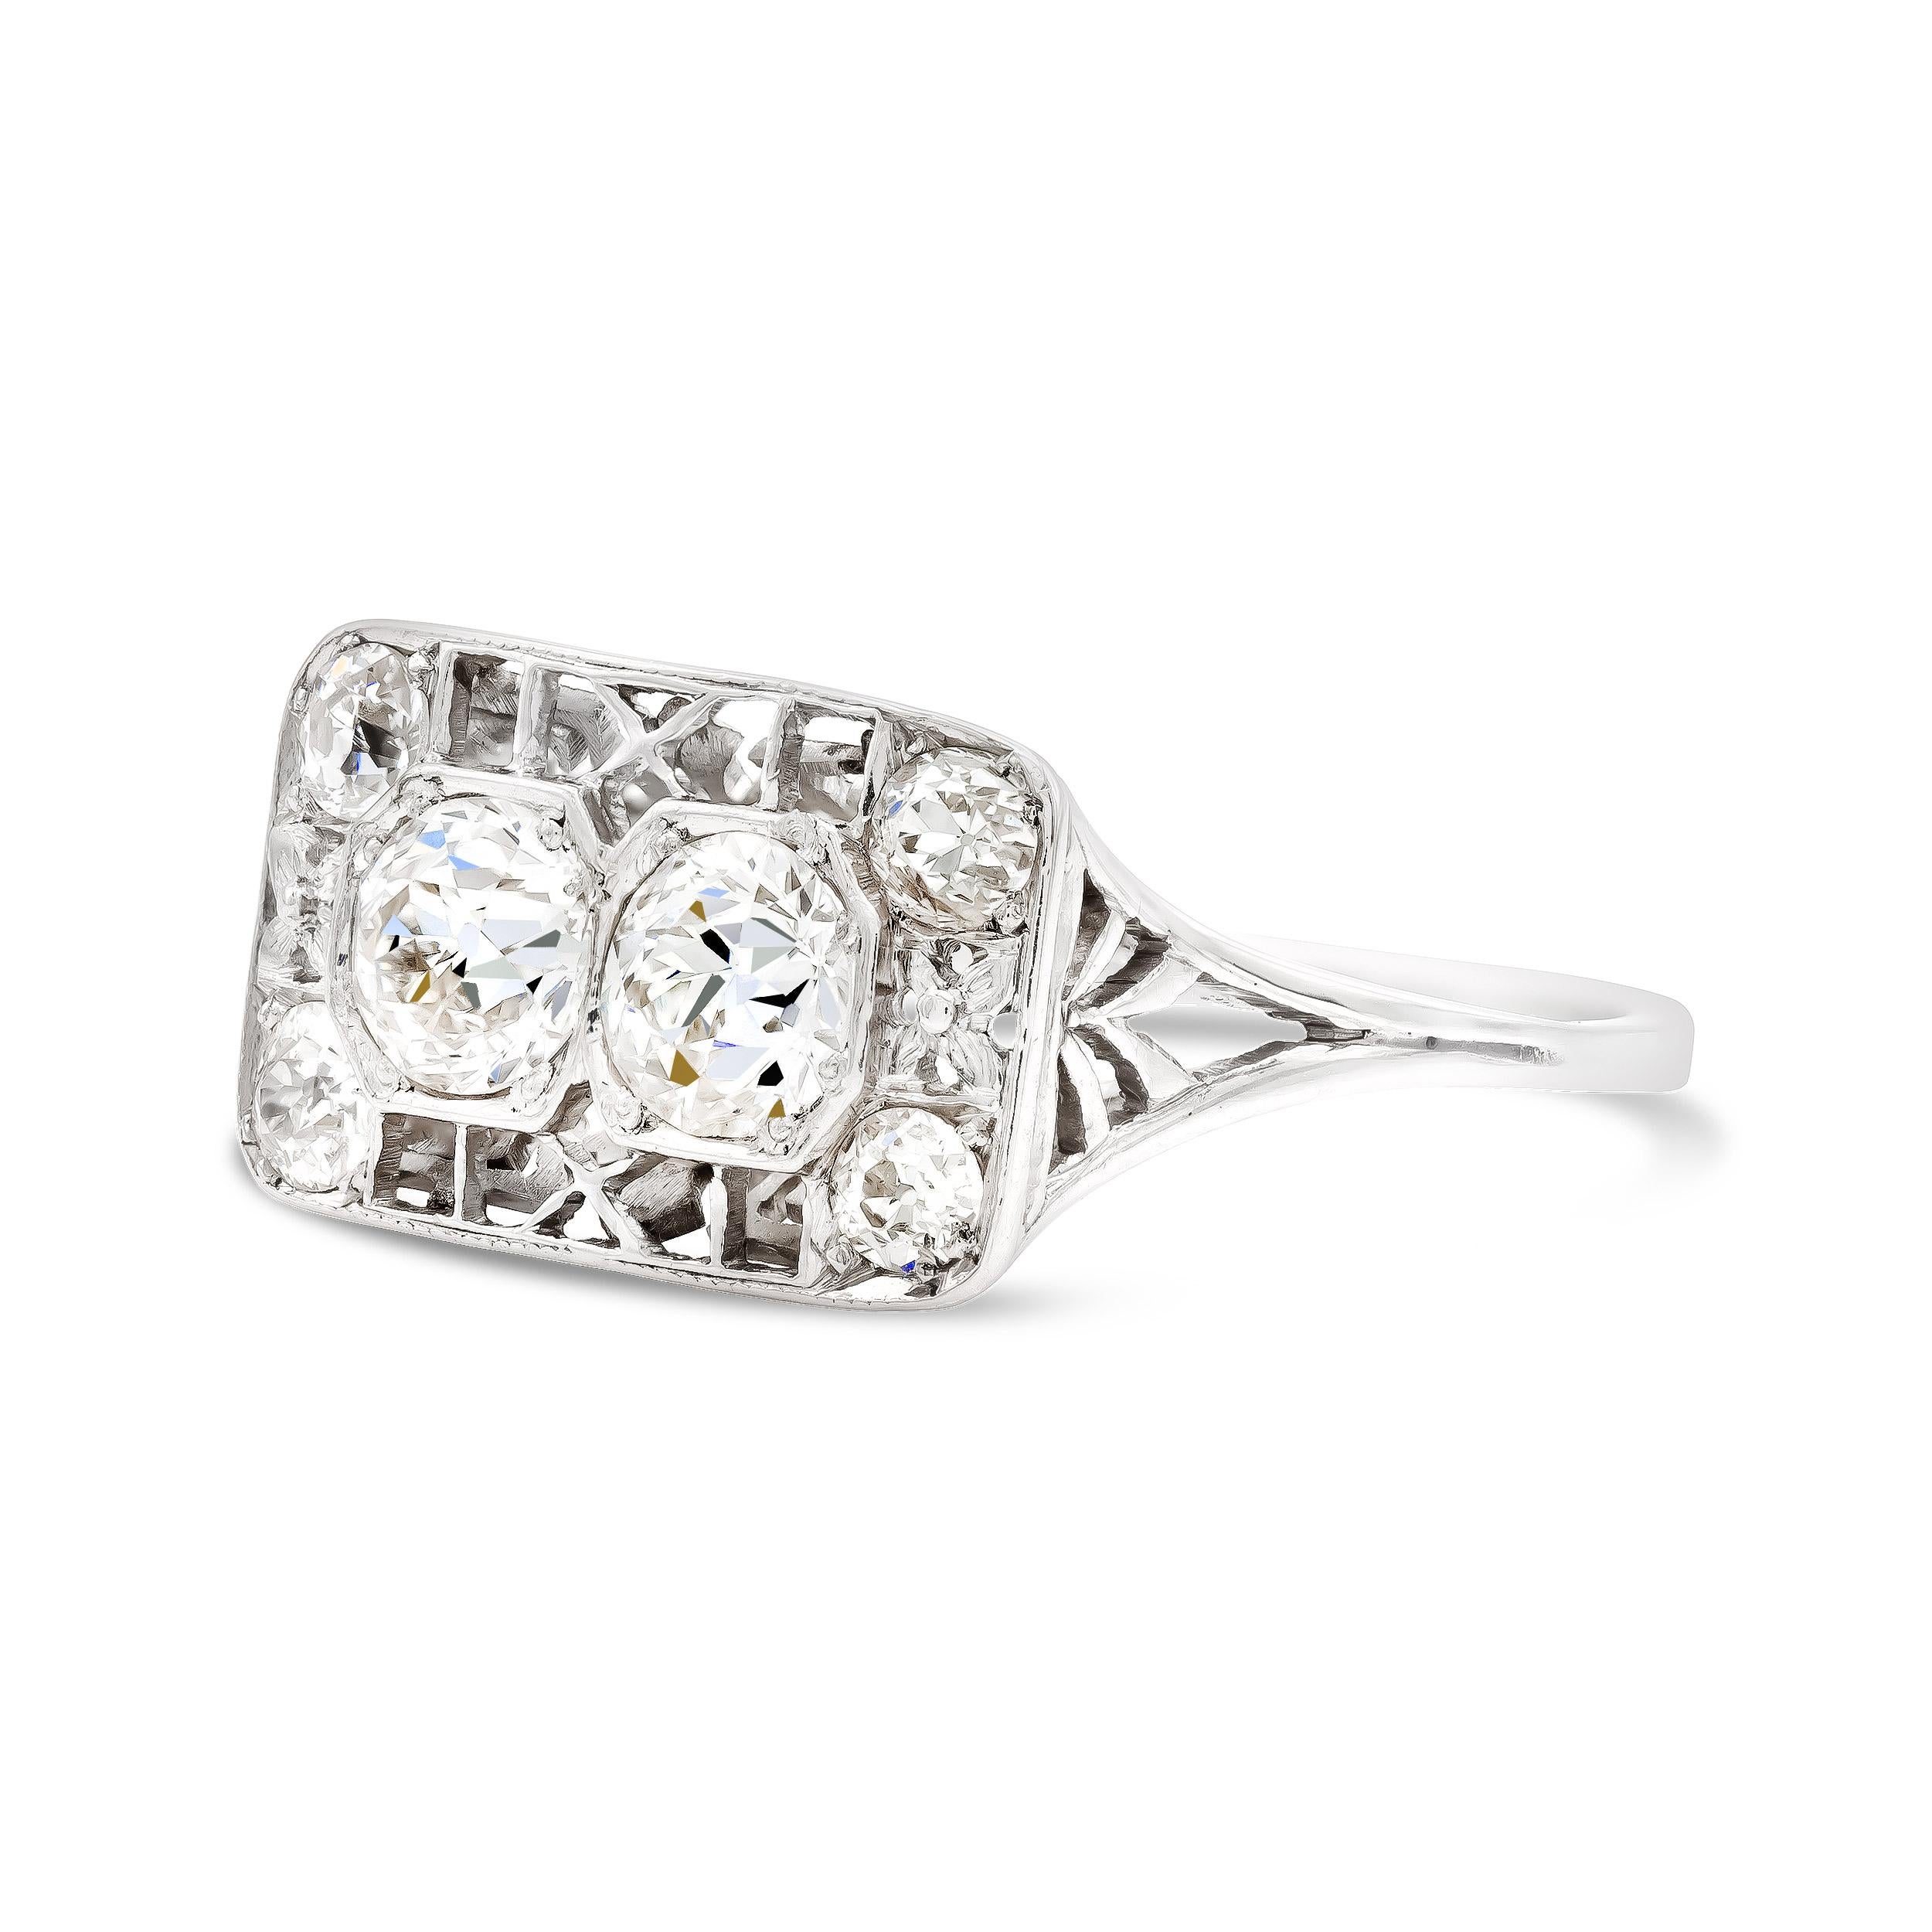 A twinkling twin set of old Euros sit nestled in this platinum filigree ring. At 1-carat total, they sparkle bright in an illusion octagonal setting. Its deco-era angular detailing throughout the face, gallery and band are charming beyond words. We